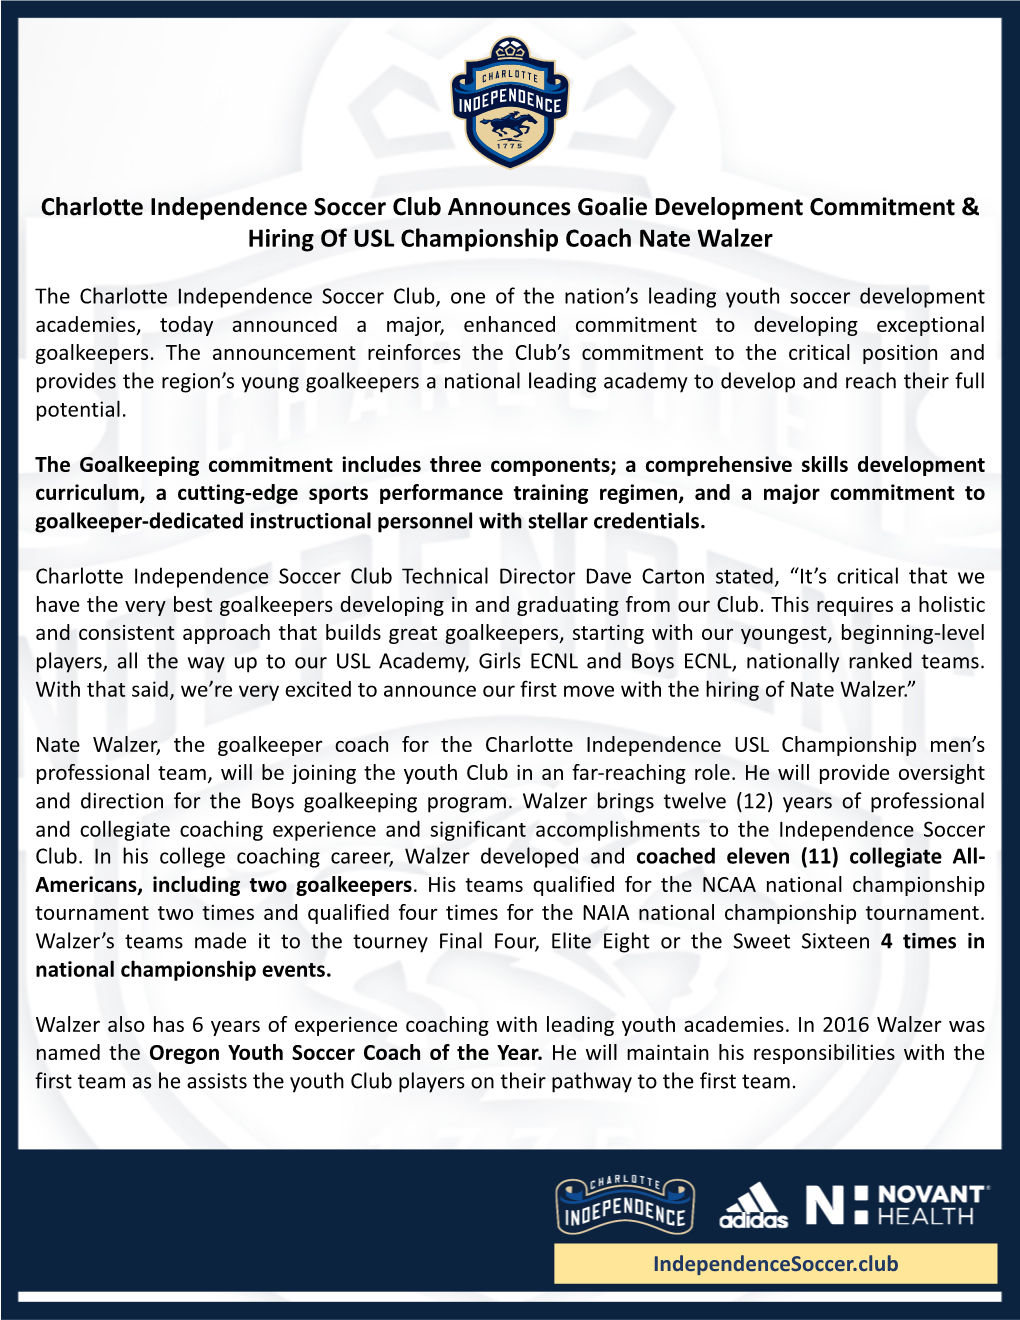 Charlotte Independence Soccer Club Announces Goalie Development Commitment & Hiring of USL Championship Coach Nate Walzer